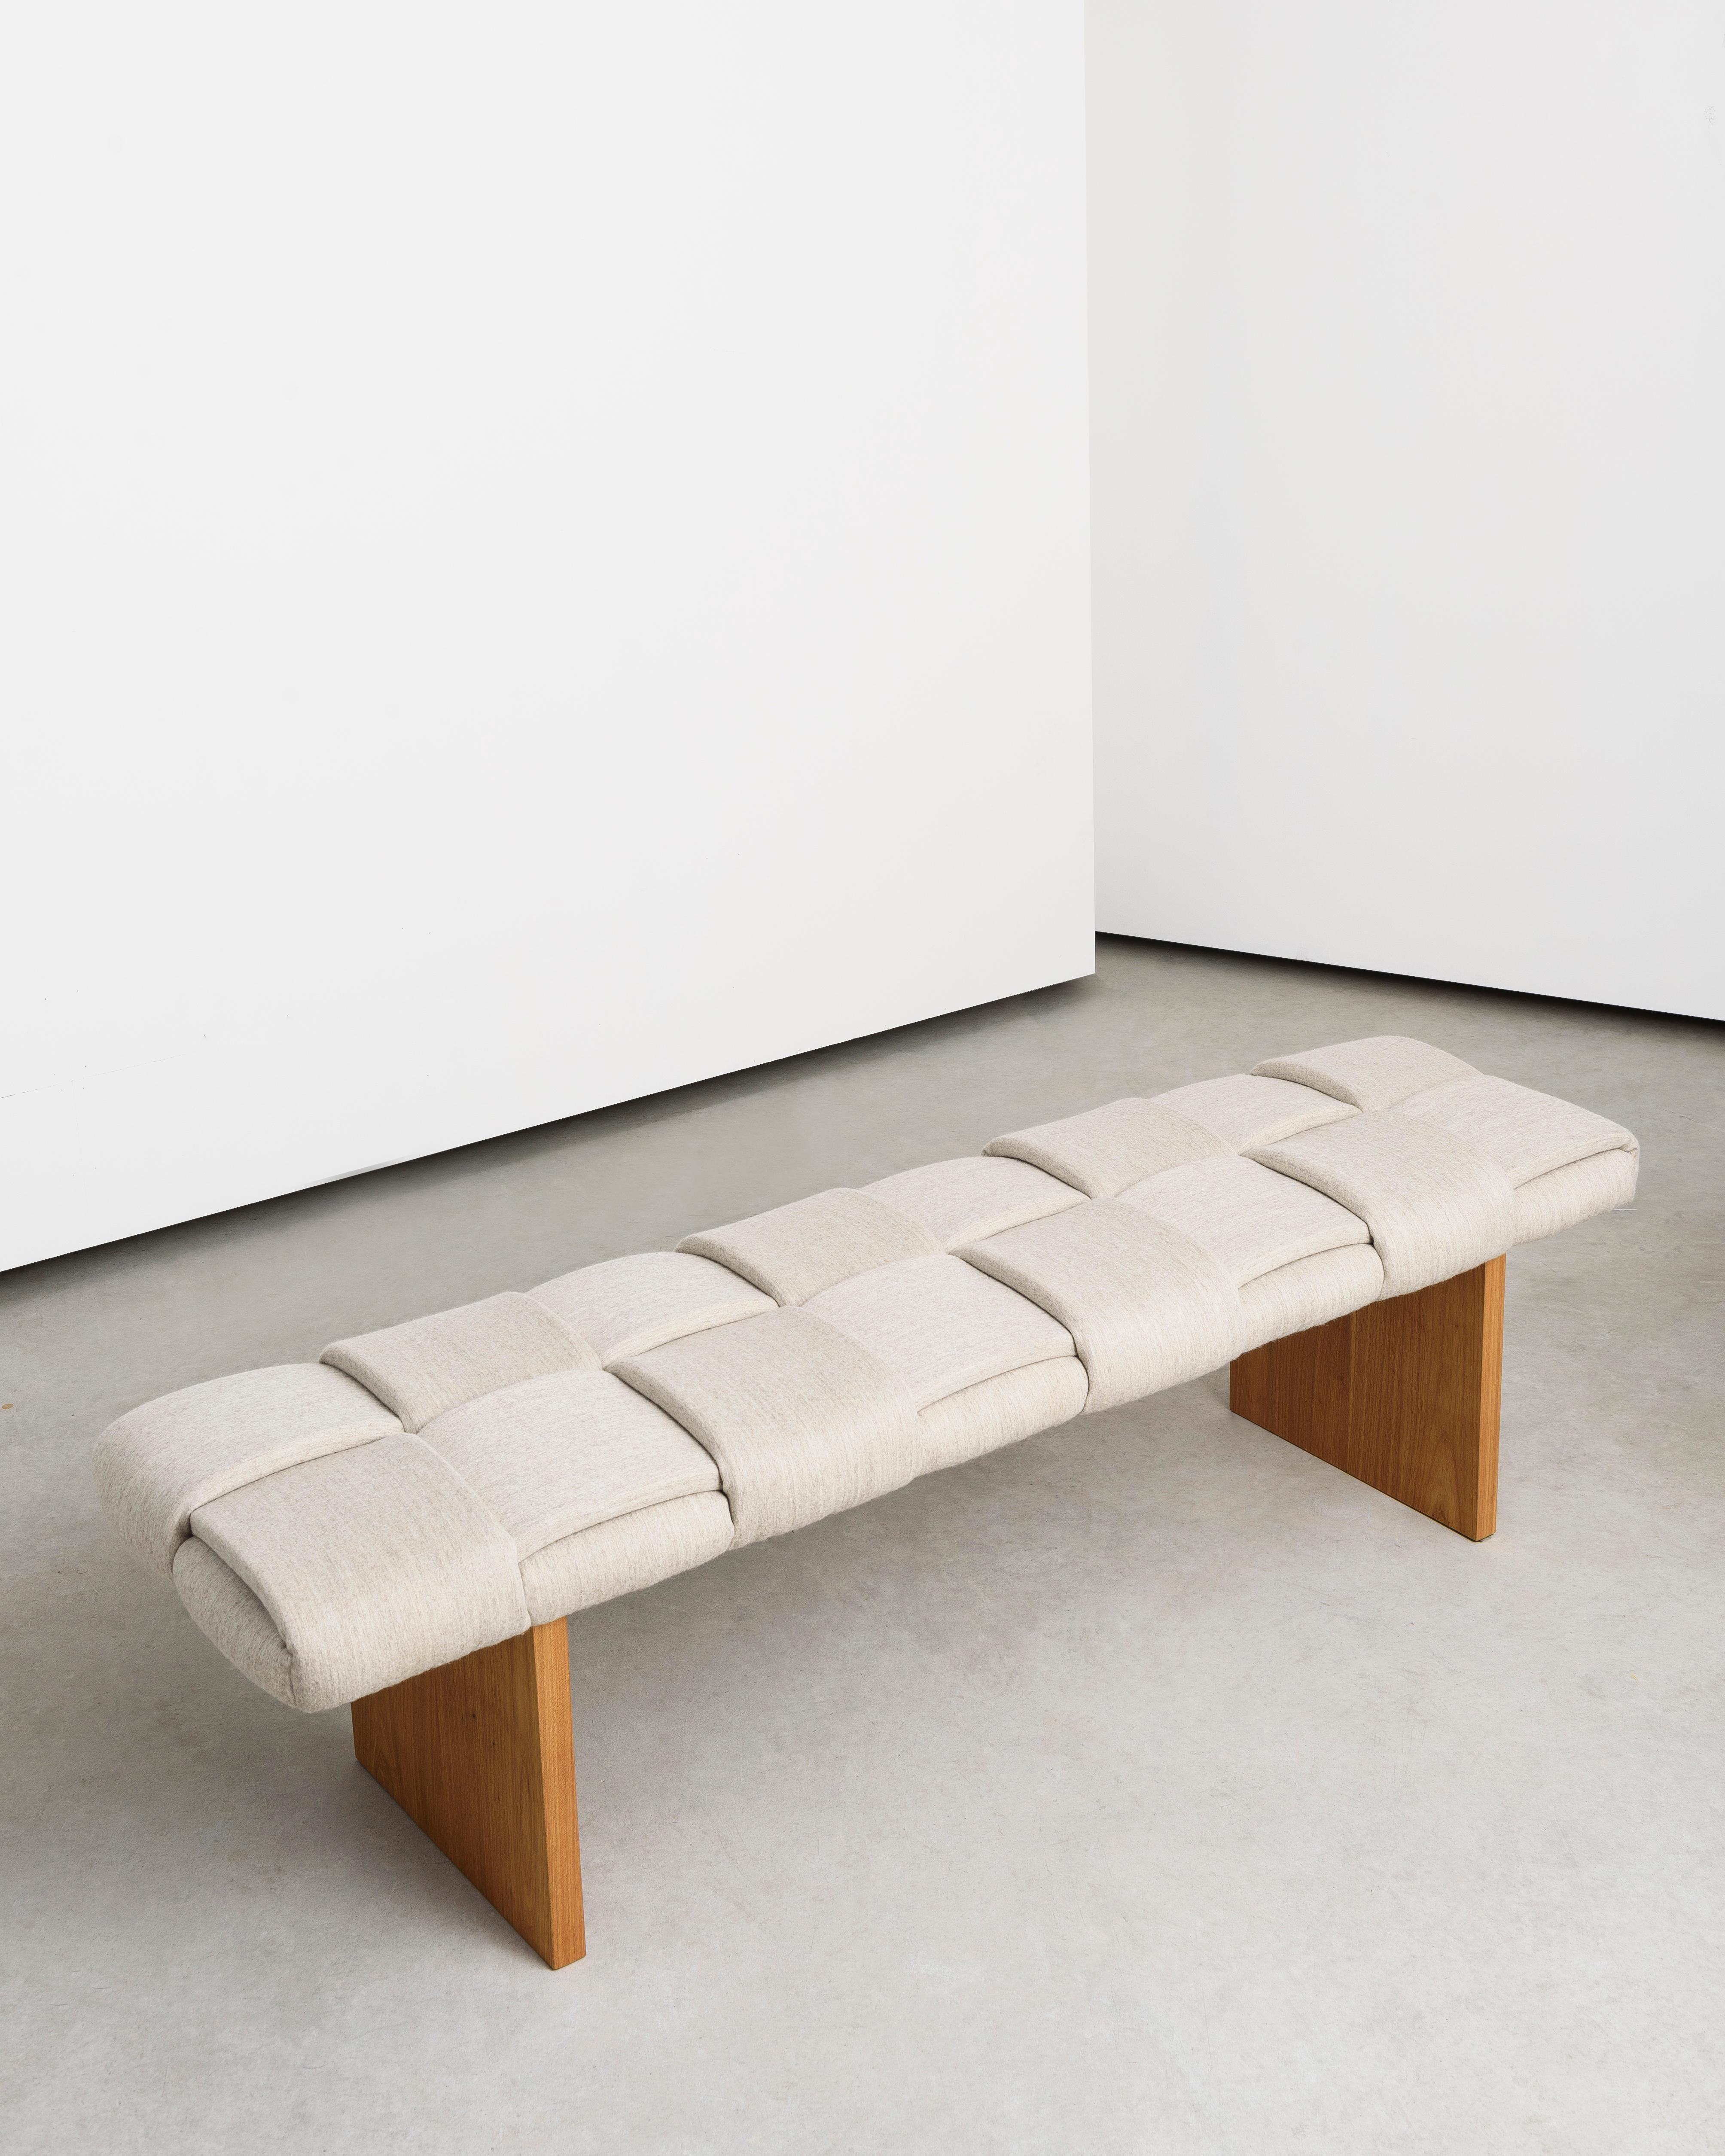 The Trama collection was created around the concept of tress. Started in 2014 today it has a variety of pieces with different typologies .

Trama Benches 22 are made with wool fabric and foam stripes, woven and stitched by hand. The structure is